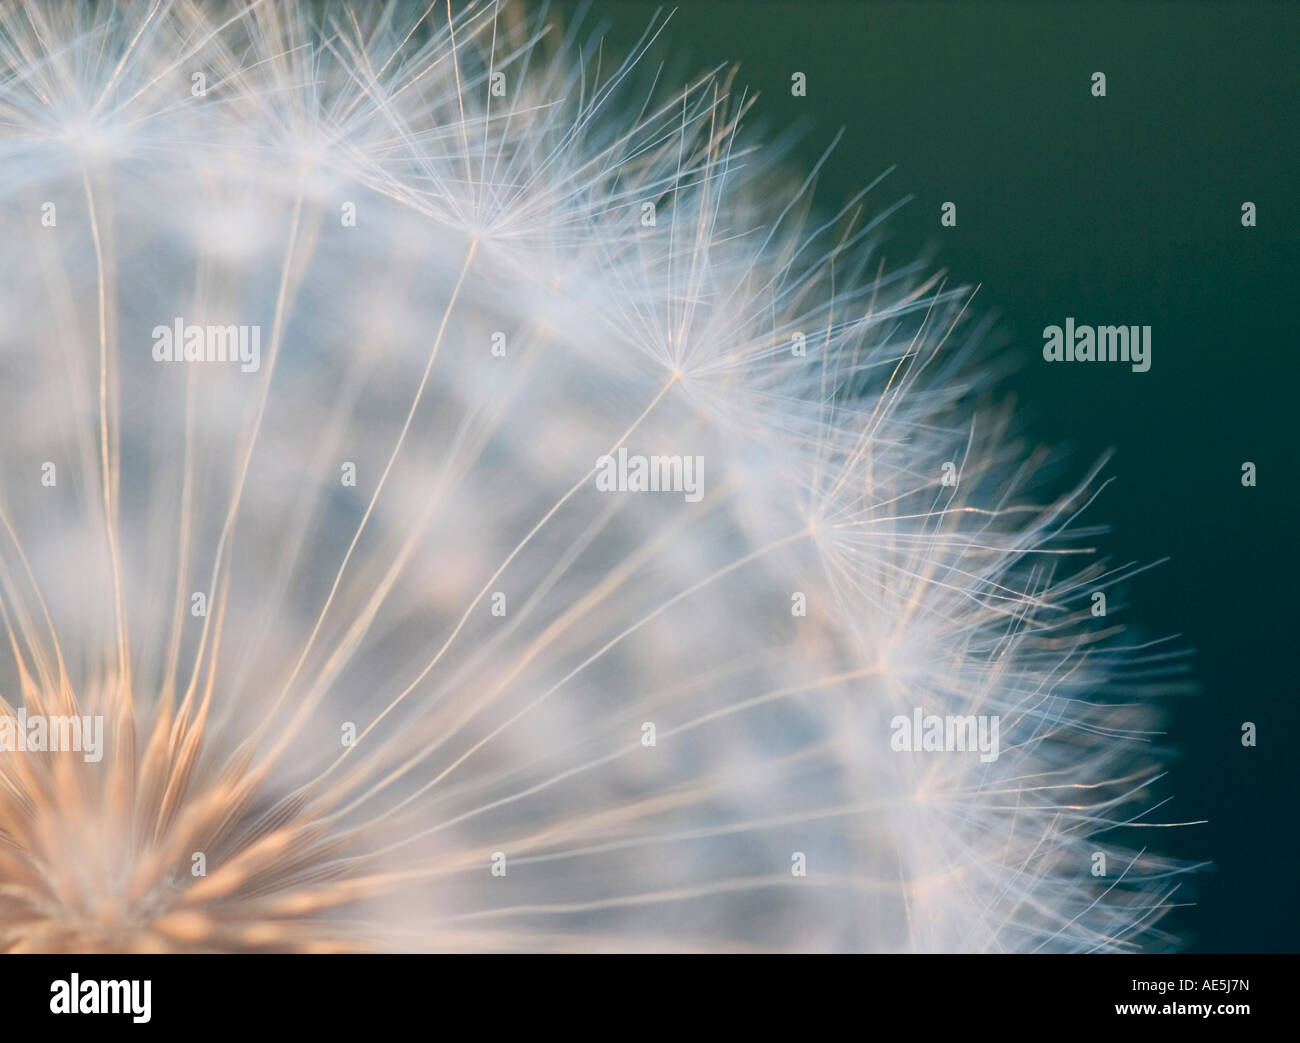 Extreme closeup of a quarter of a dandelion showing delicate fuzzy tendrils growing out of the center of the seed Stock Photo